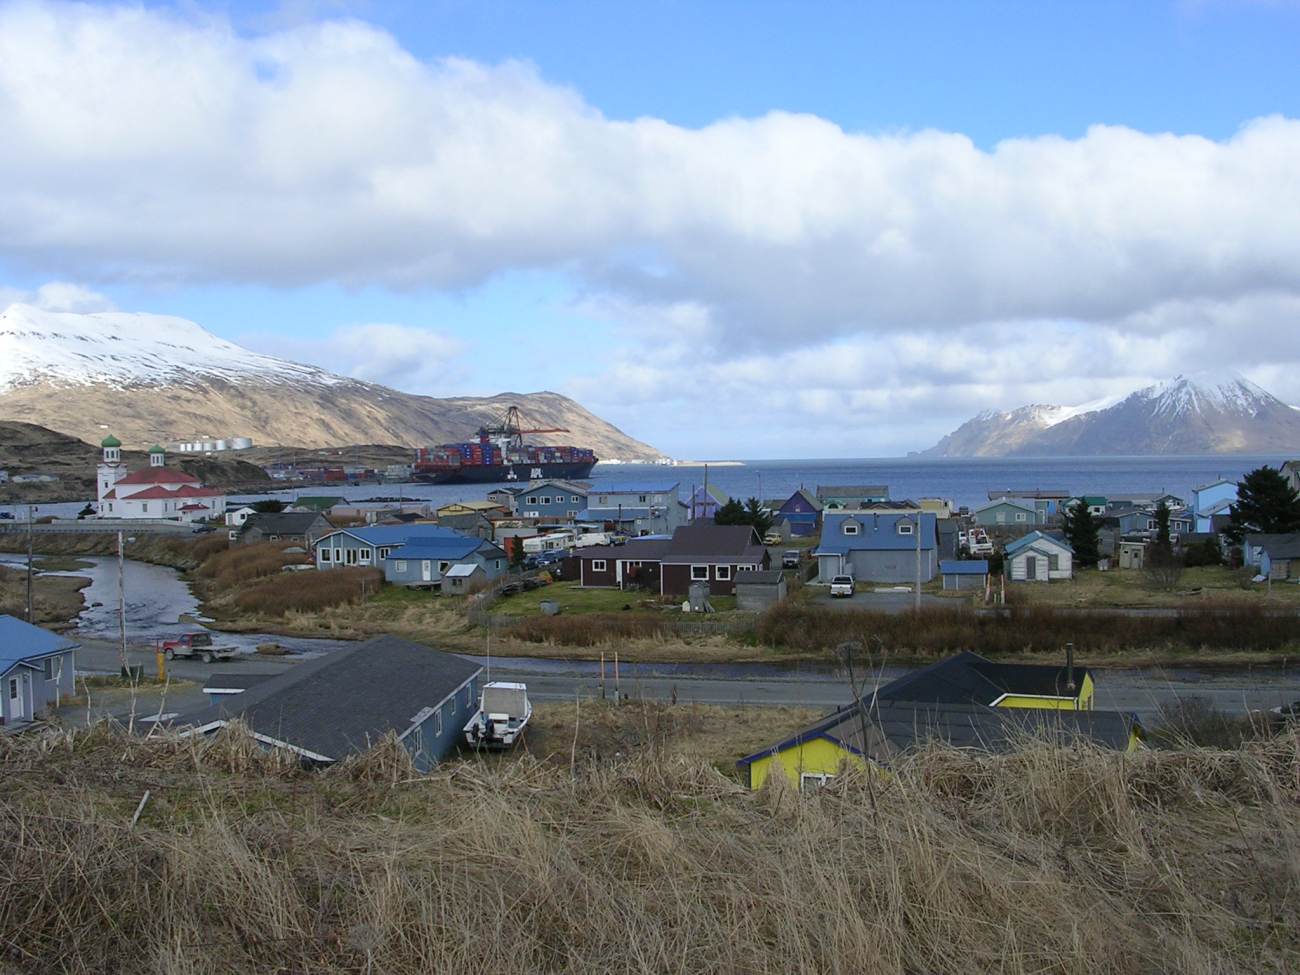 Residential district of Dutch Harbor with the old Russian Orthodox Church andthe American President Lines container dock in the middle distance